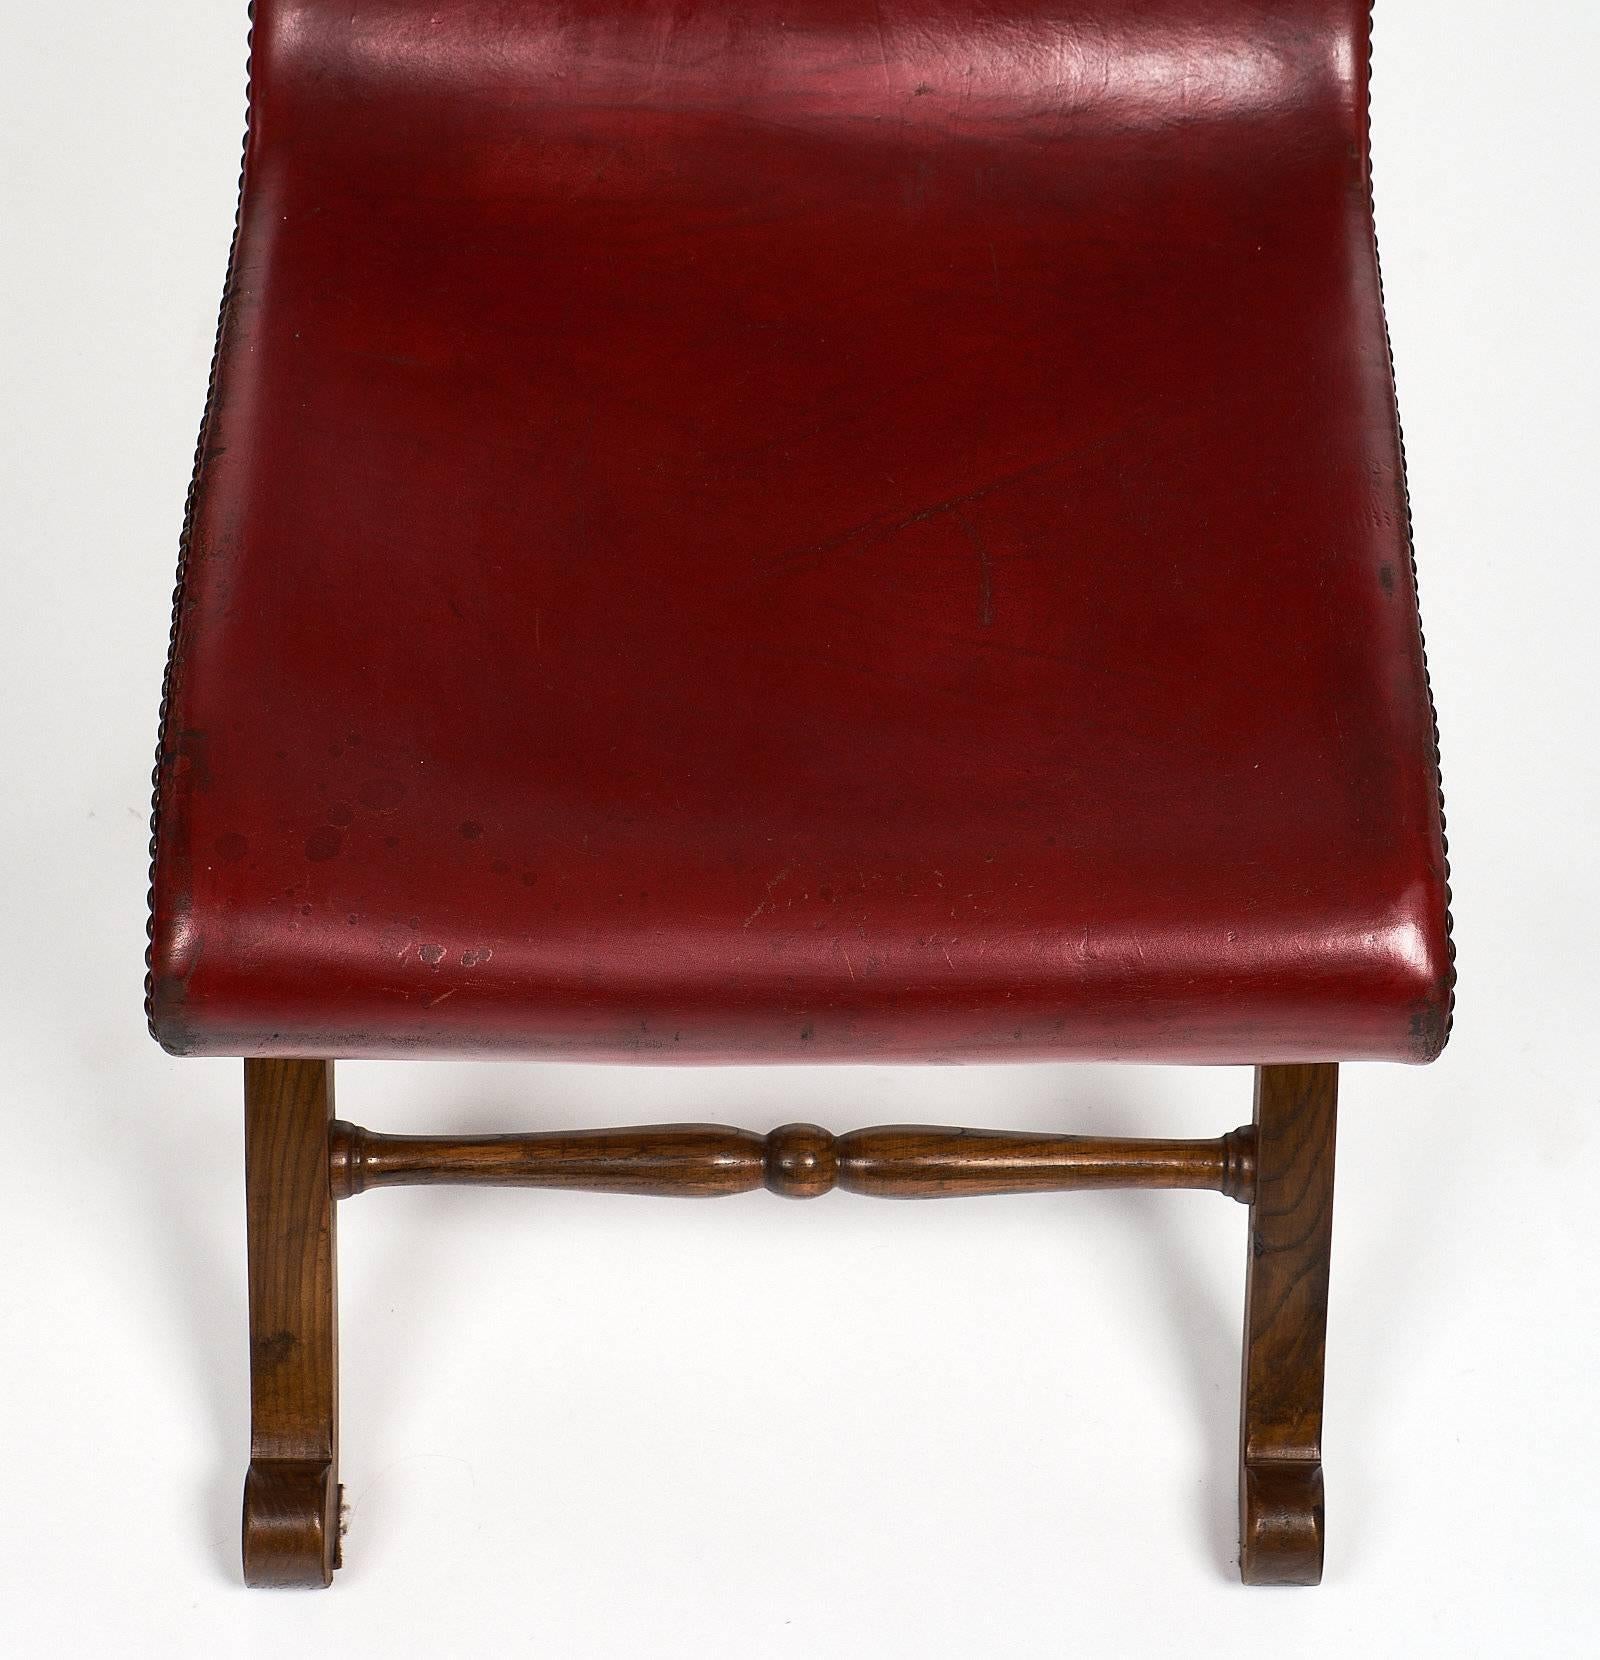 Early 20th Century Set of Four Crimson Leather Valenti Chairs